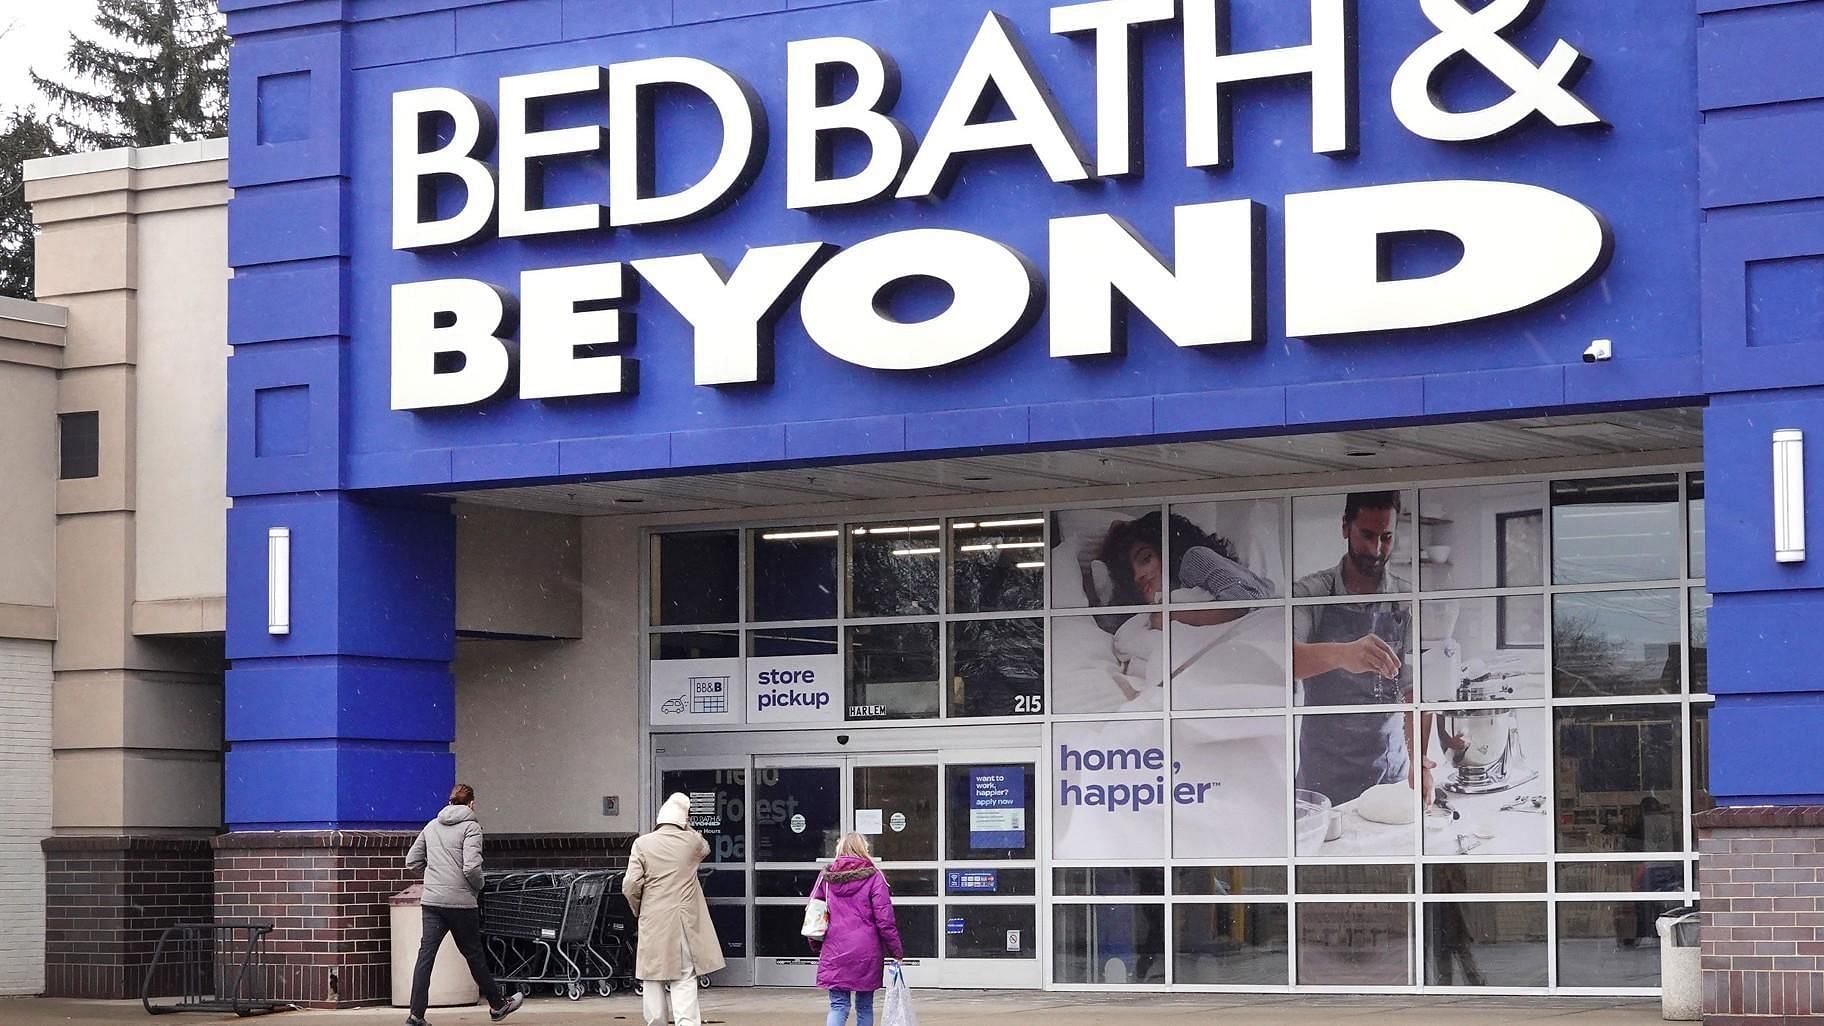 Social media users outraged as a home decor and furnishing brand employee calls the police after assuming that the black couple at the store is shoplifting. (Image via Bed Bath and Beyond)